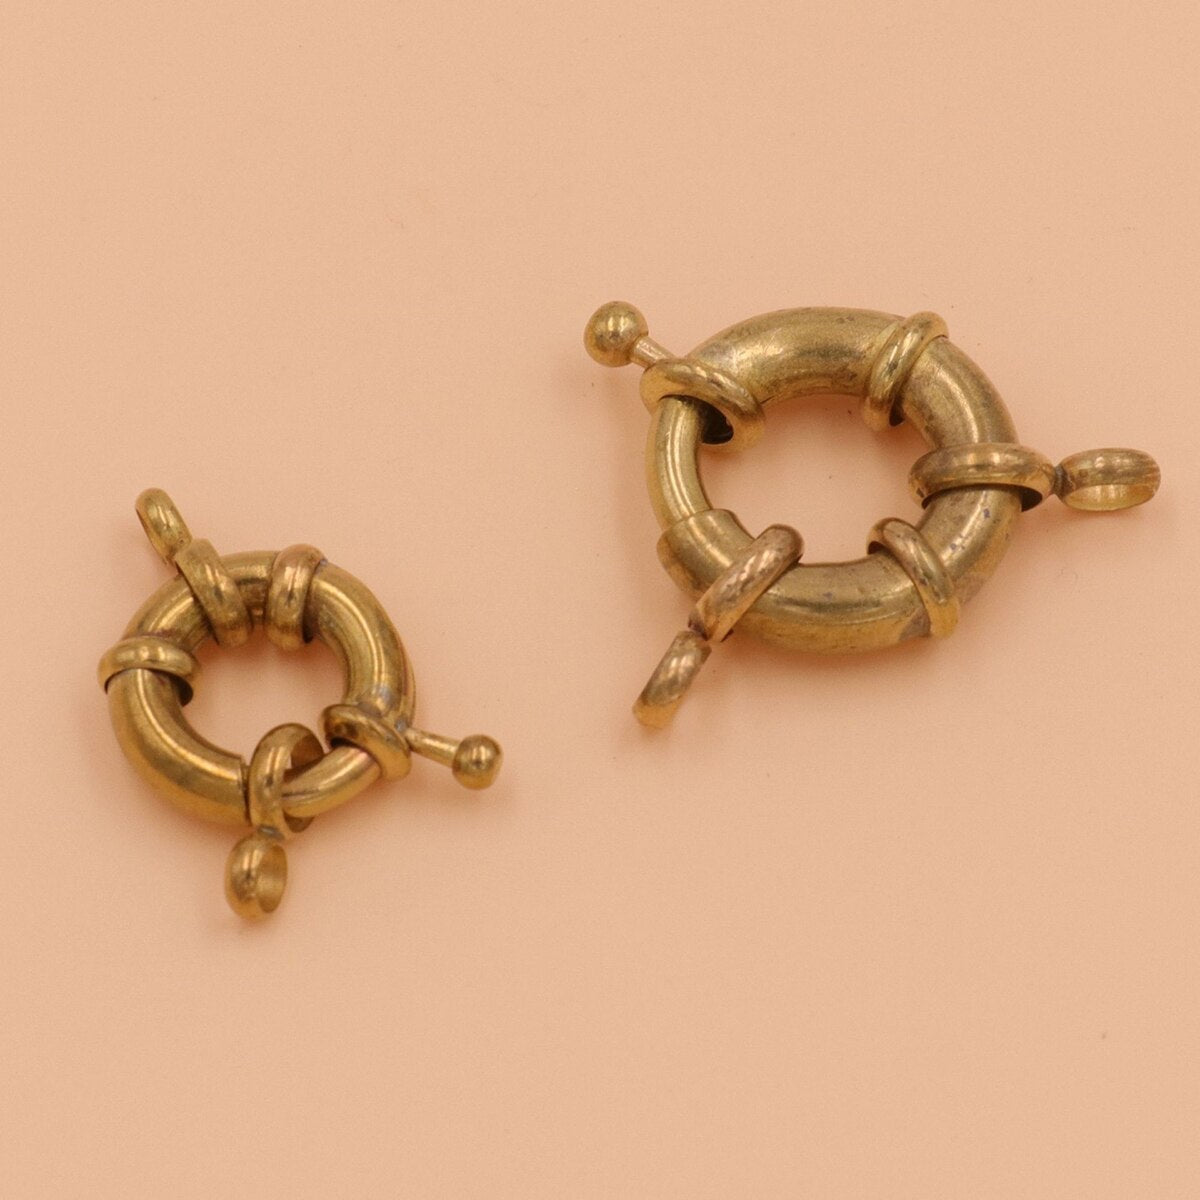 C 2pcs Brass Jewelry O-ring Snap Hook with Double 